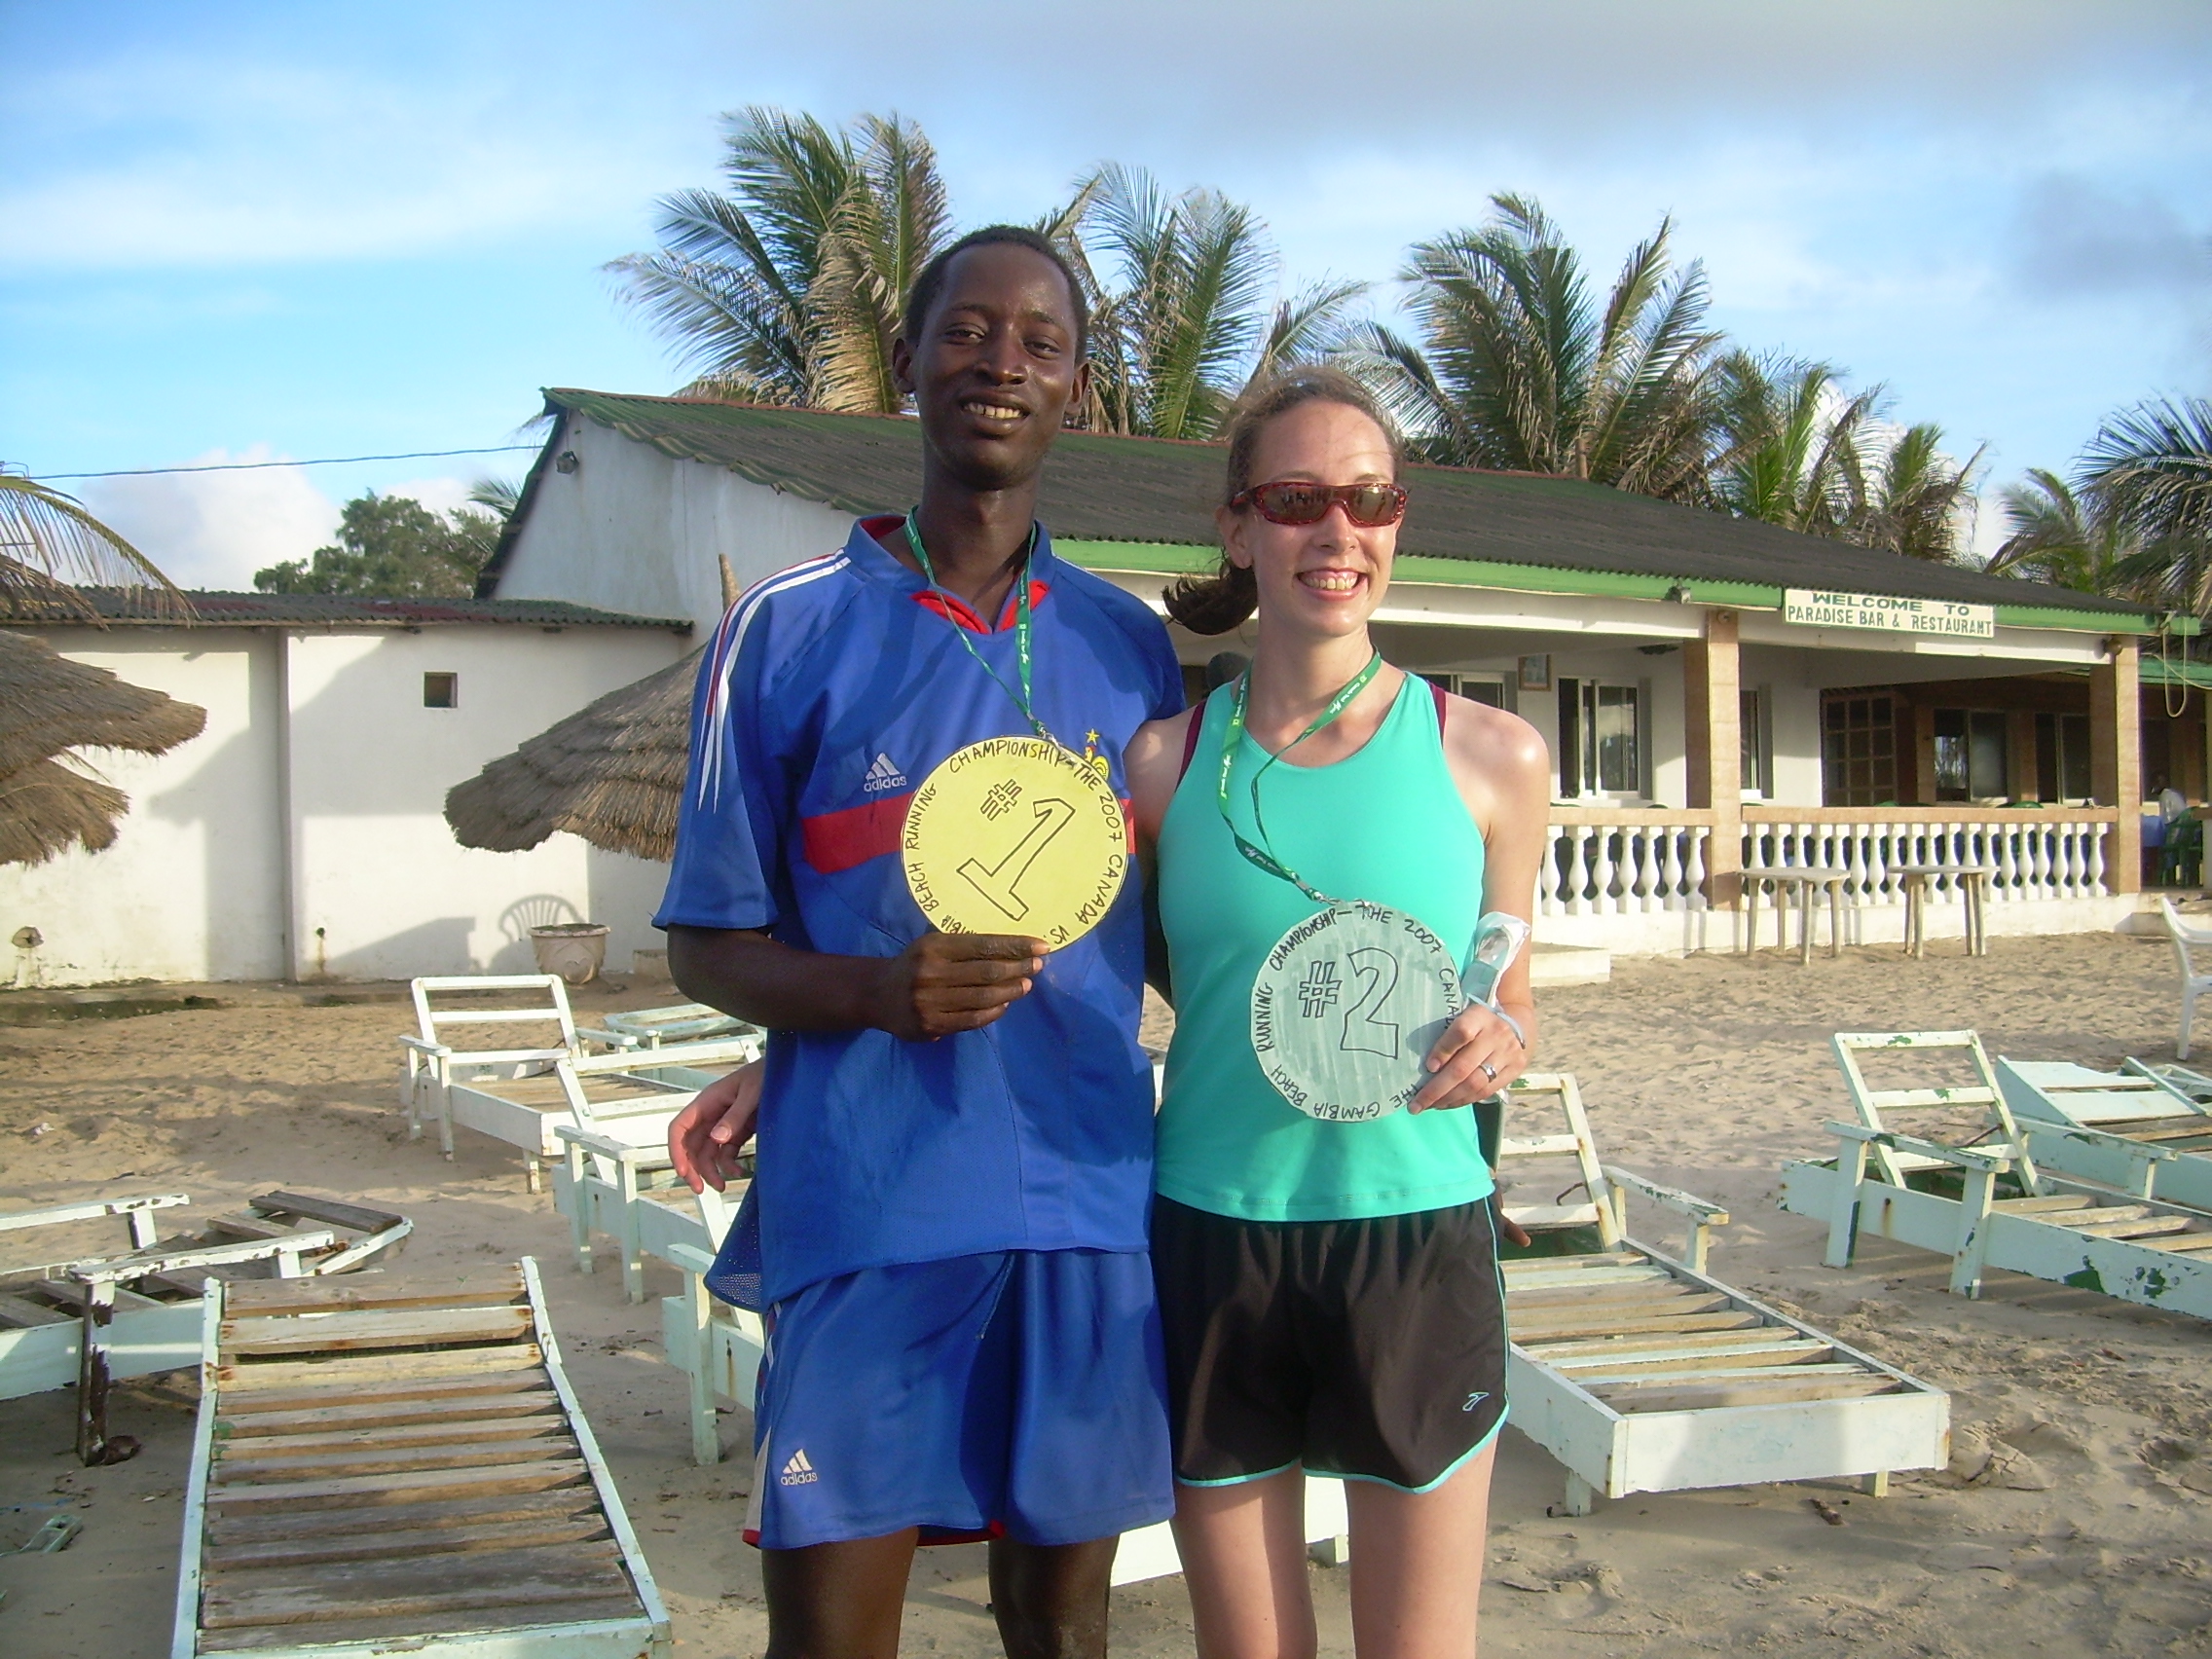 2 running partners- a girl from Canada and a boy from Gambia